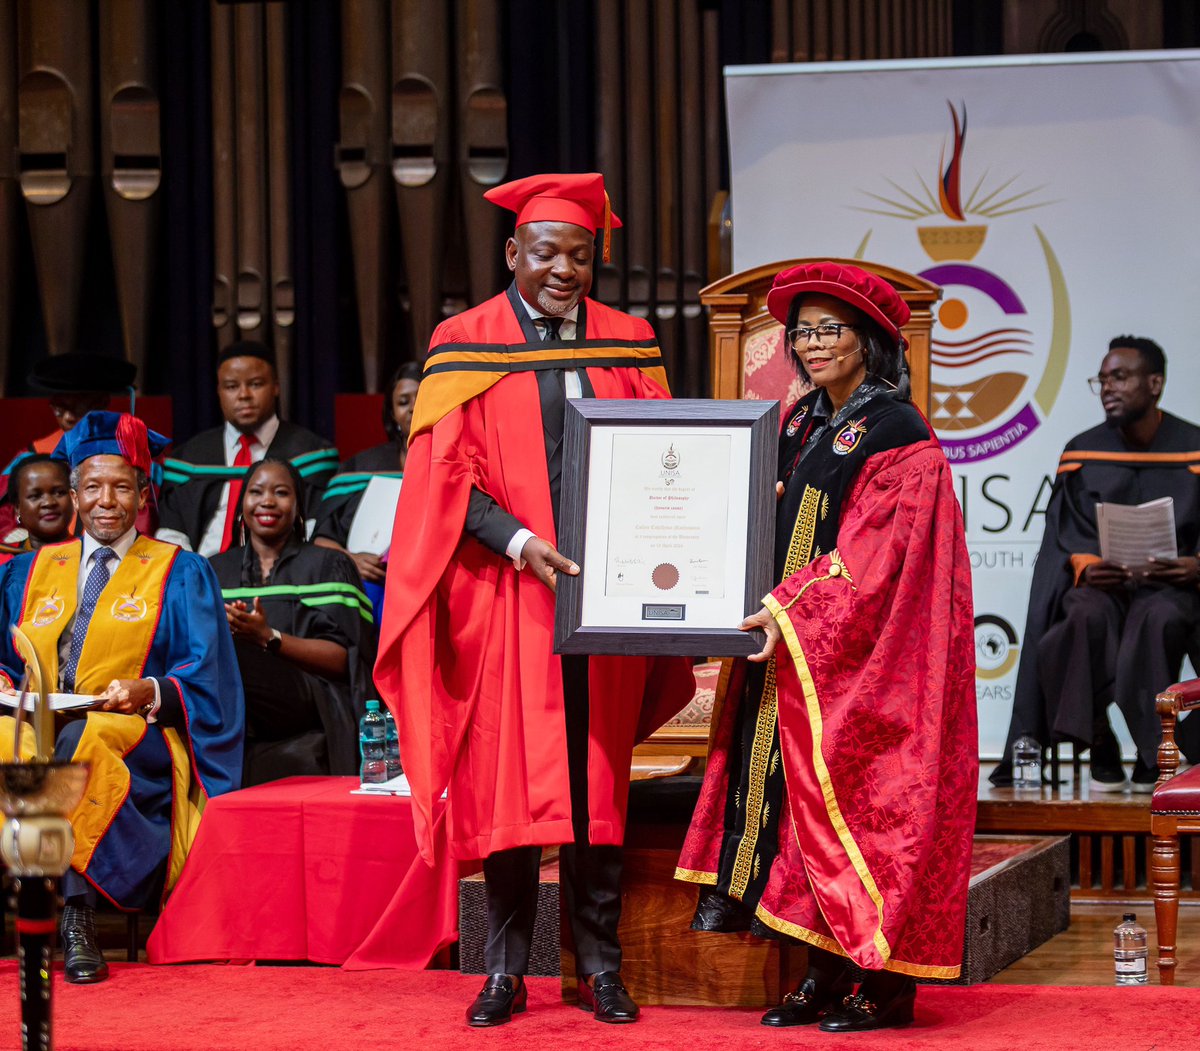 This Honorary Doctorate from the University of South Africa is a sincere dedication to the village boys and girls who grew up without hope but carried dreams in their hearts. It recognizes the compassionate work of non-profit and non-government organizations that support the…